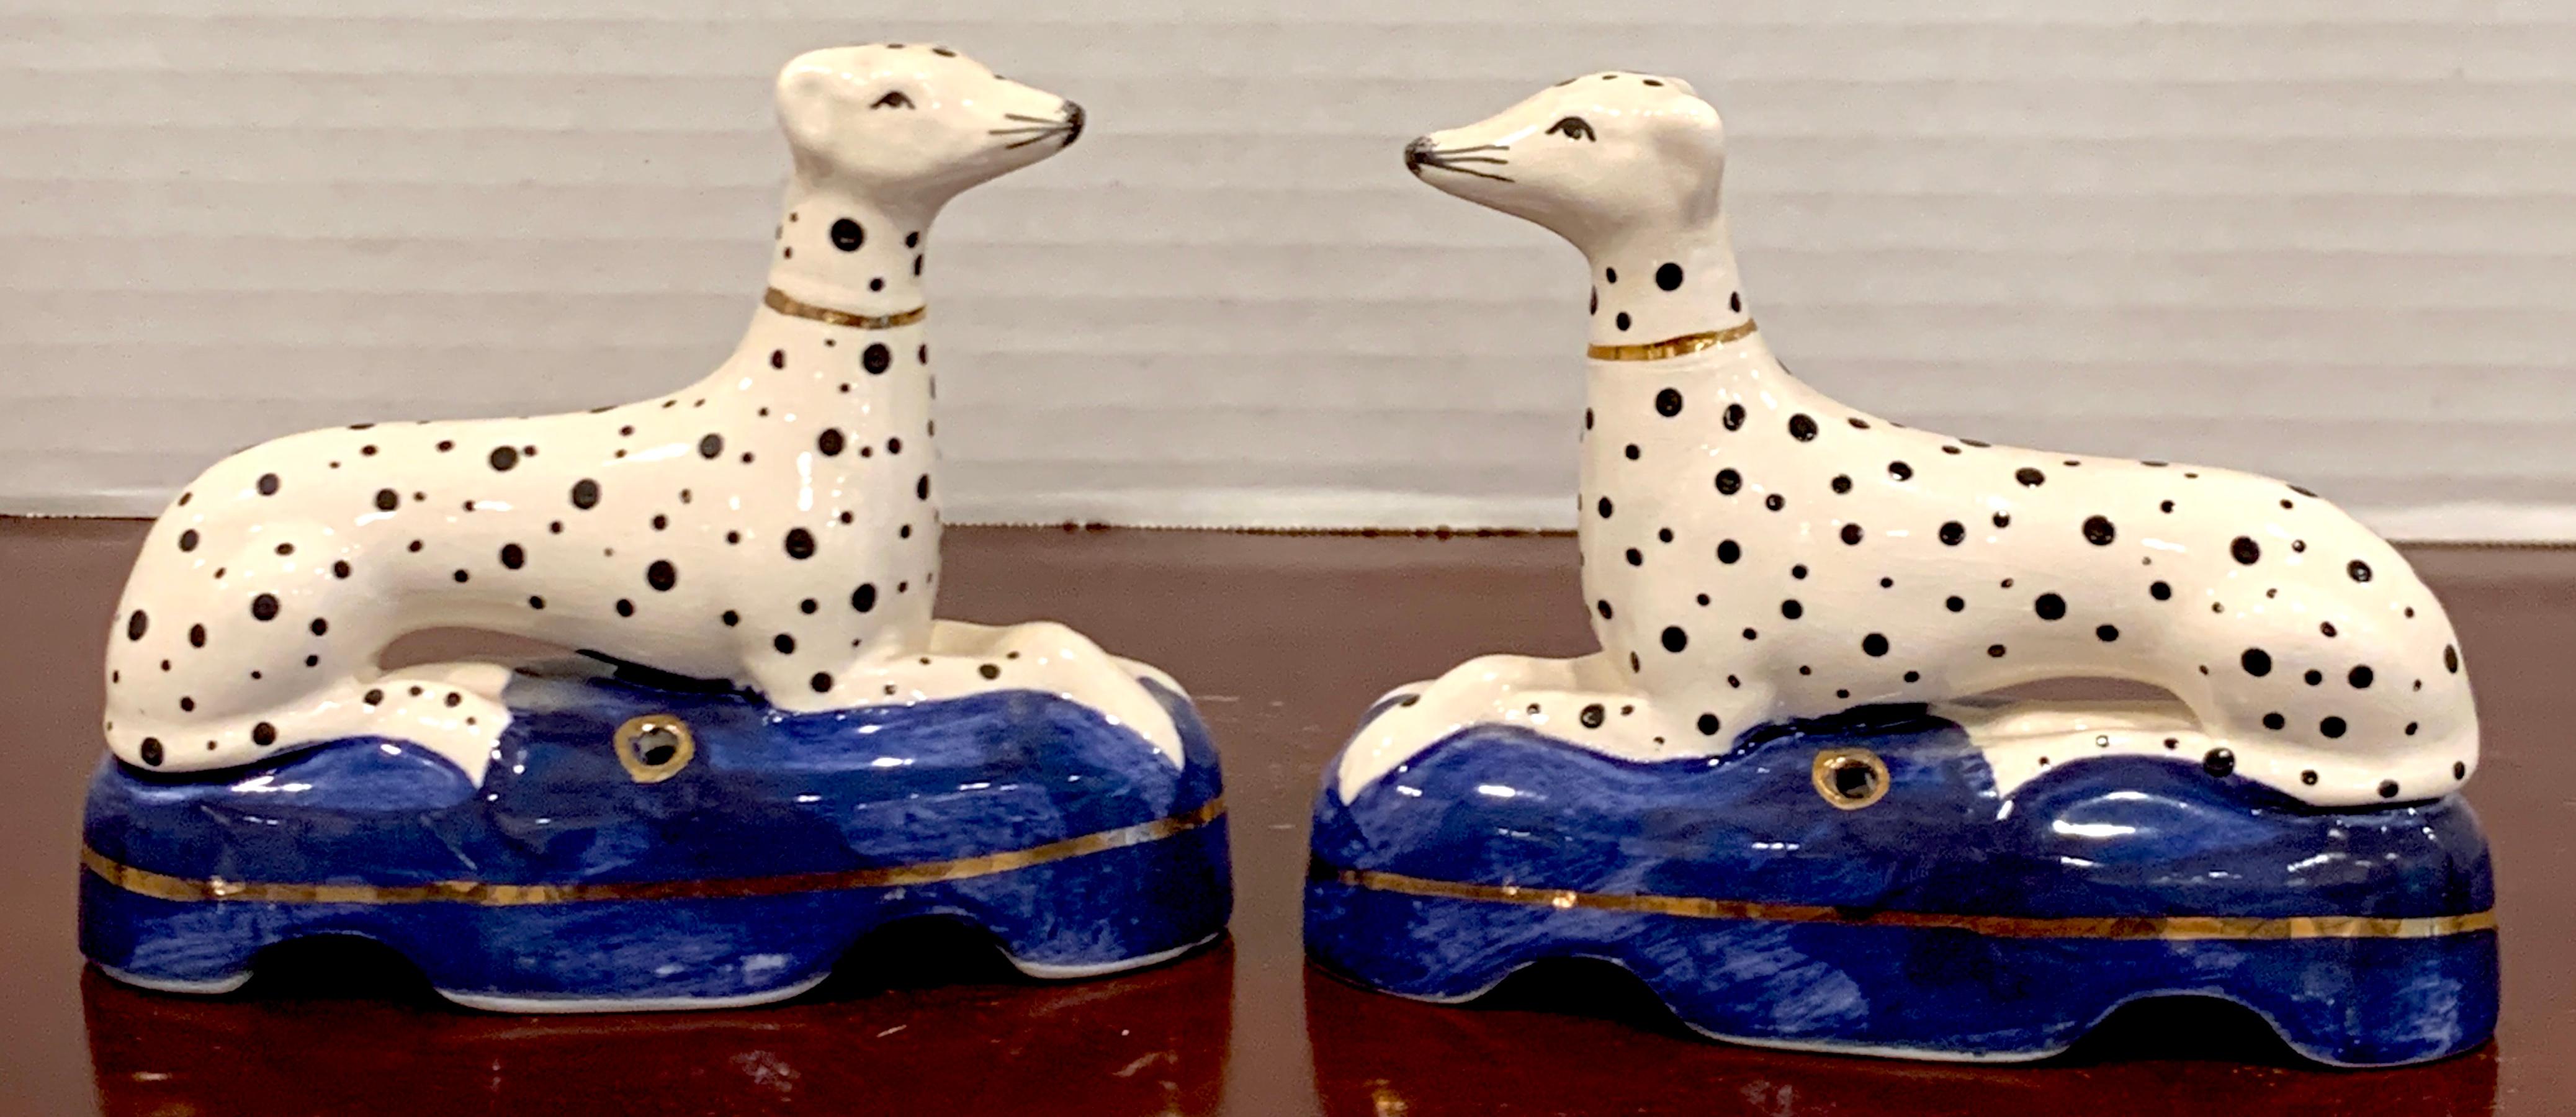 Pair of Staffordshire seated Dalmatian inkwells, each one reclining with front legs crossed, resting on an oval blue cushion. Unmarked, later 19th century examples.

   